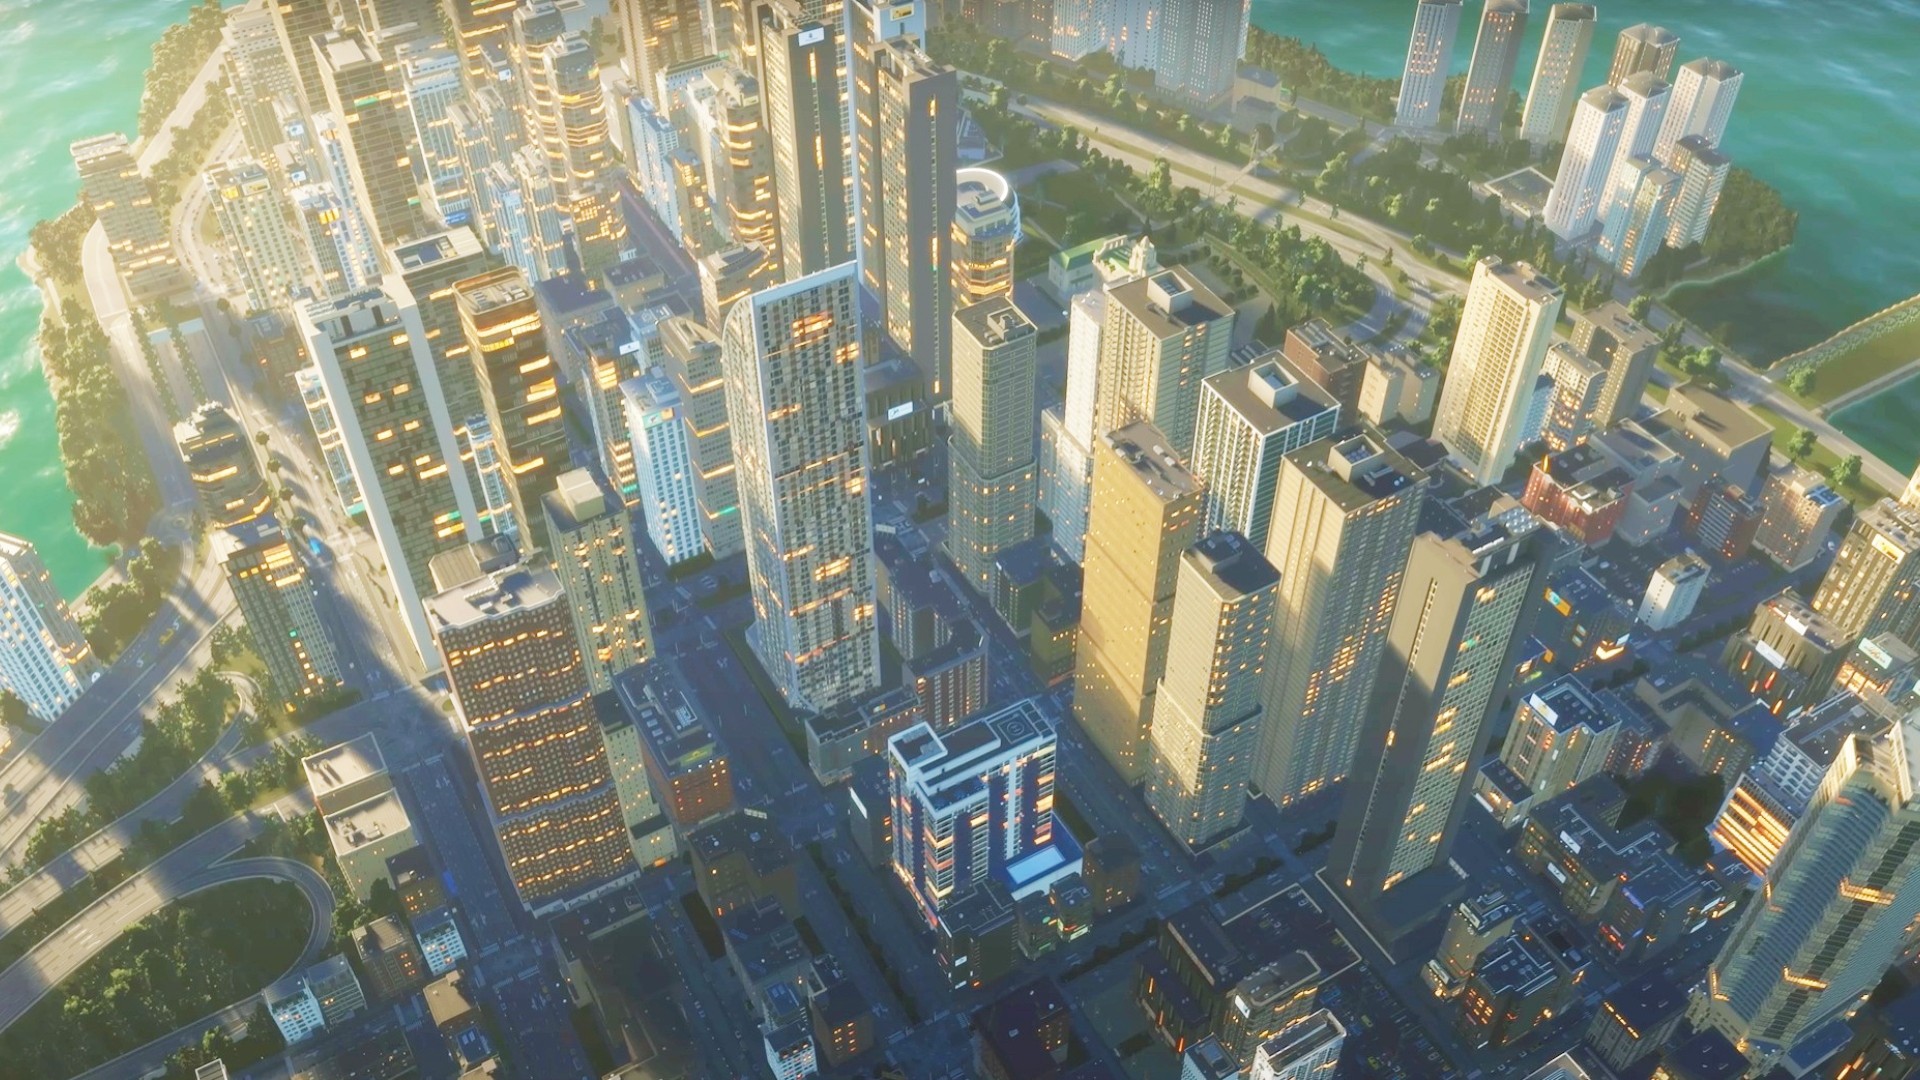 Will There Be Cities Skylines 2? Here's What We Know!